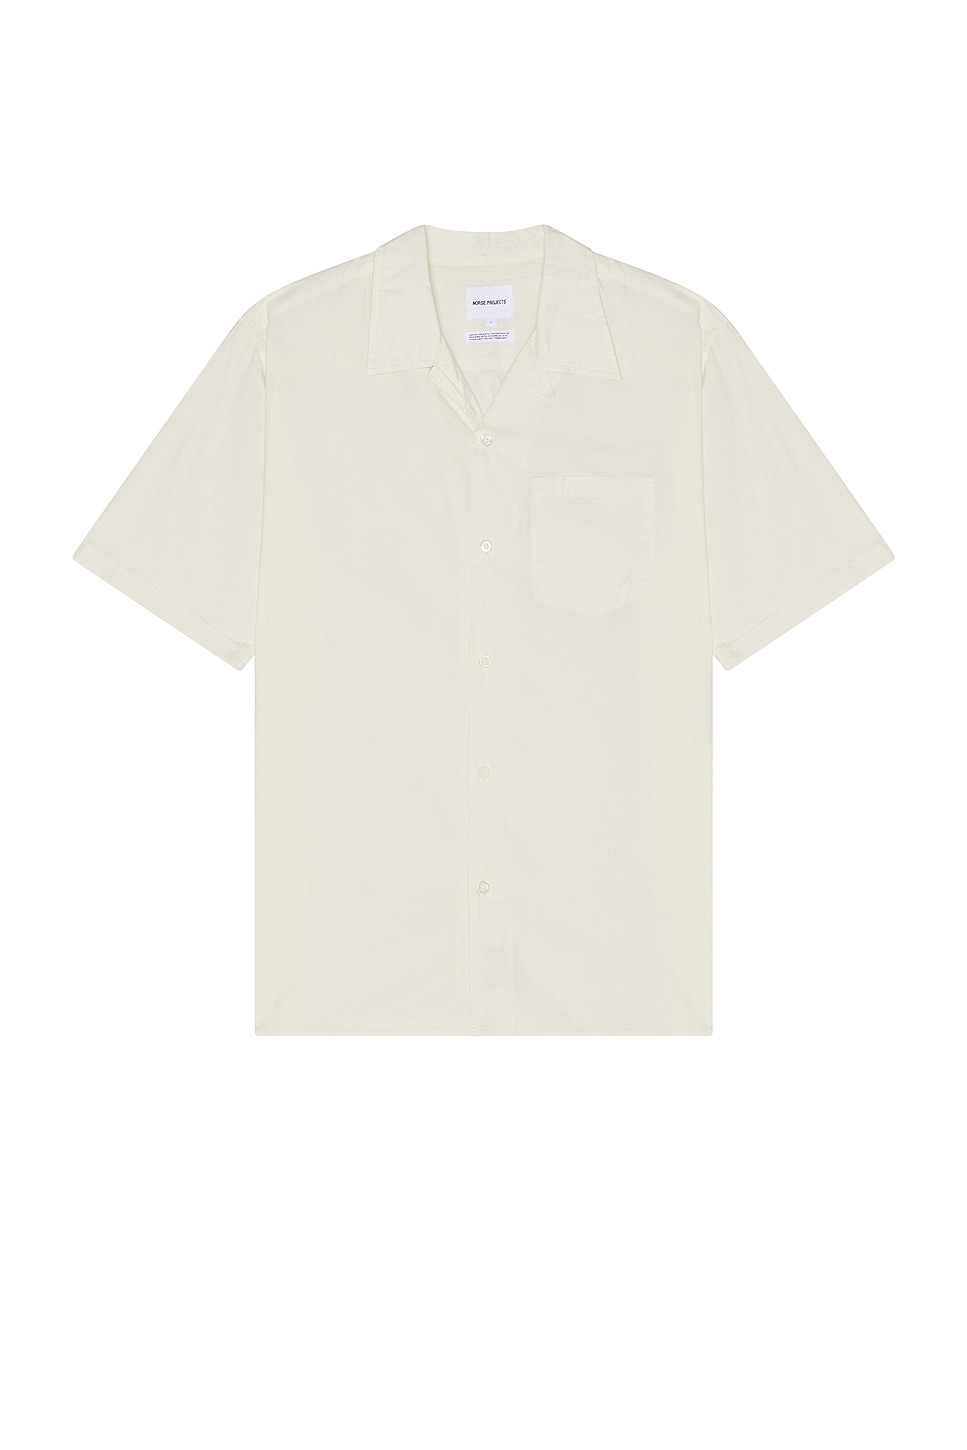 Image 1 of Norse Projects Carsten Cotton Tencel Shirt in Enamel White